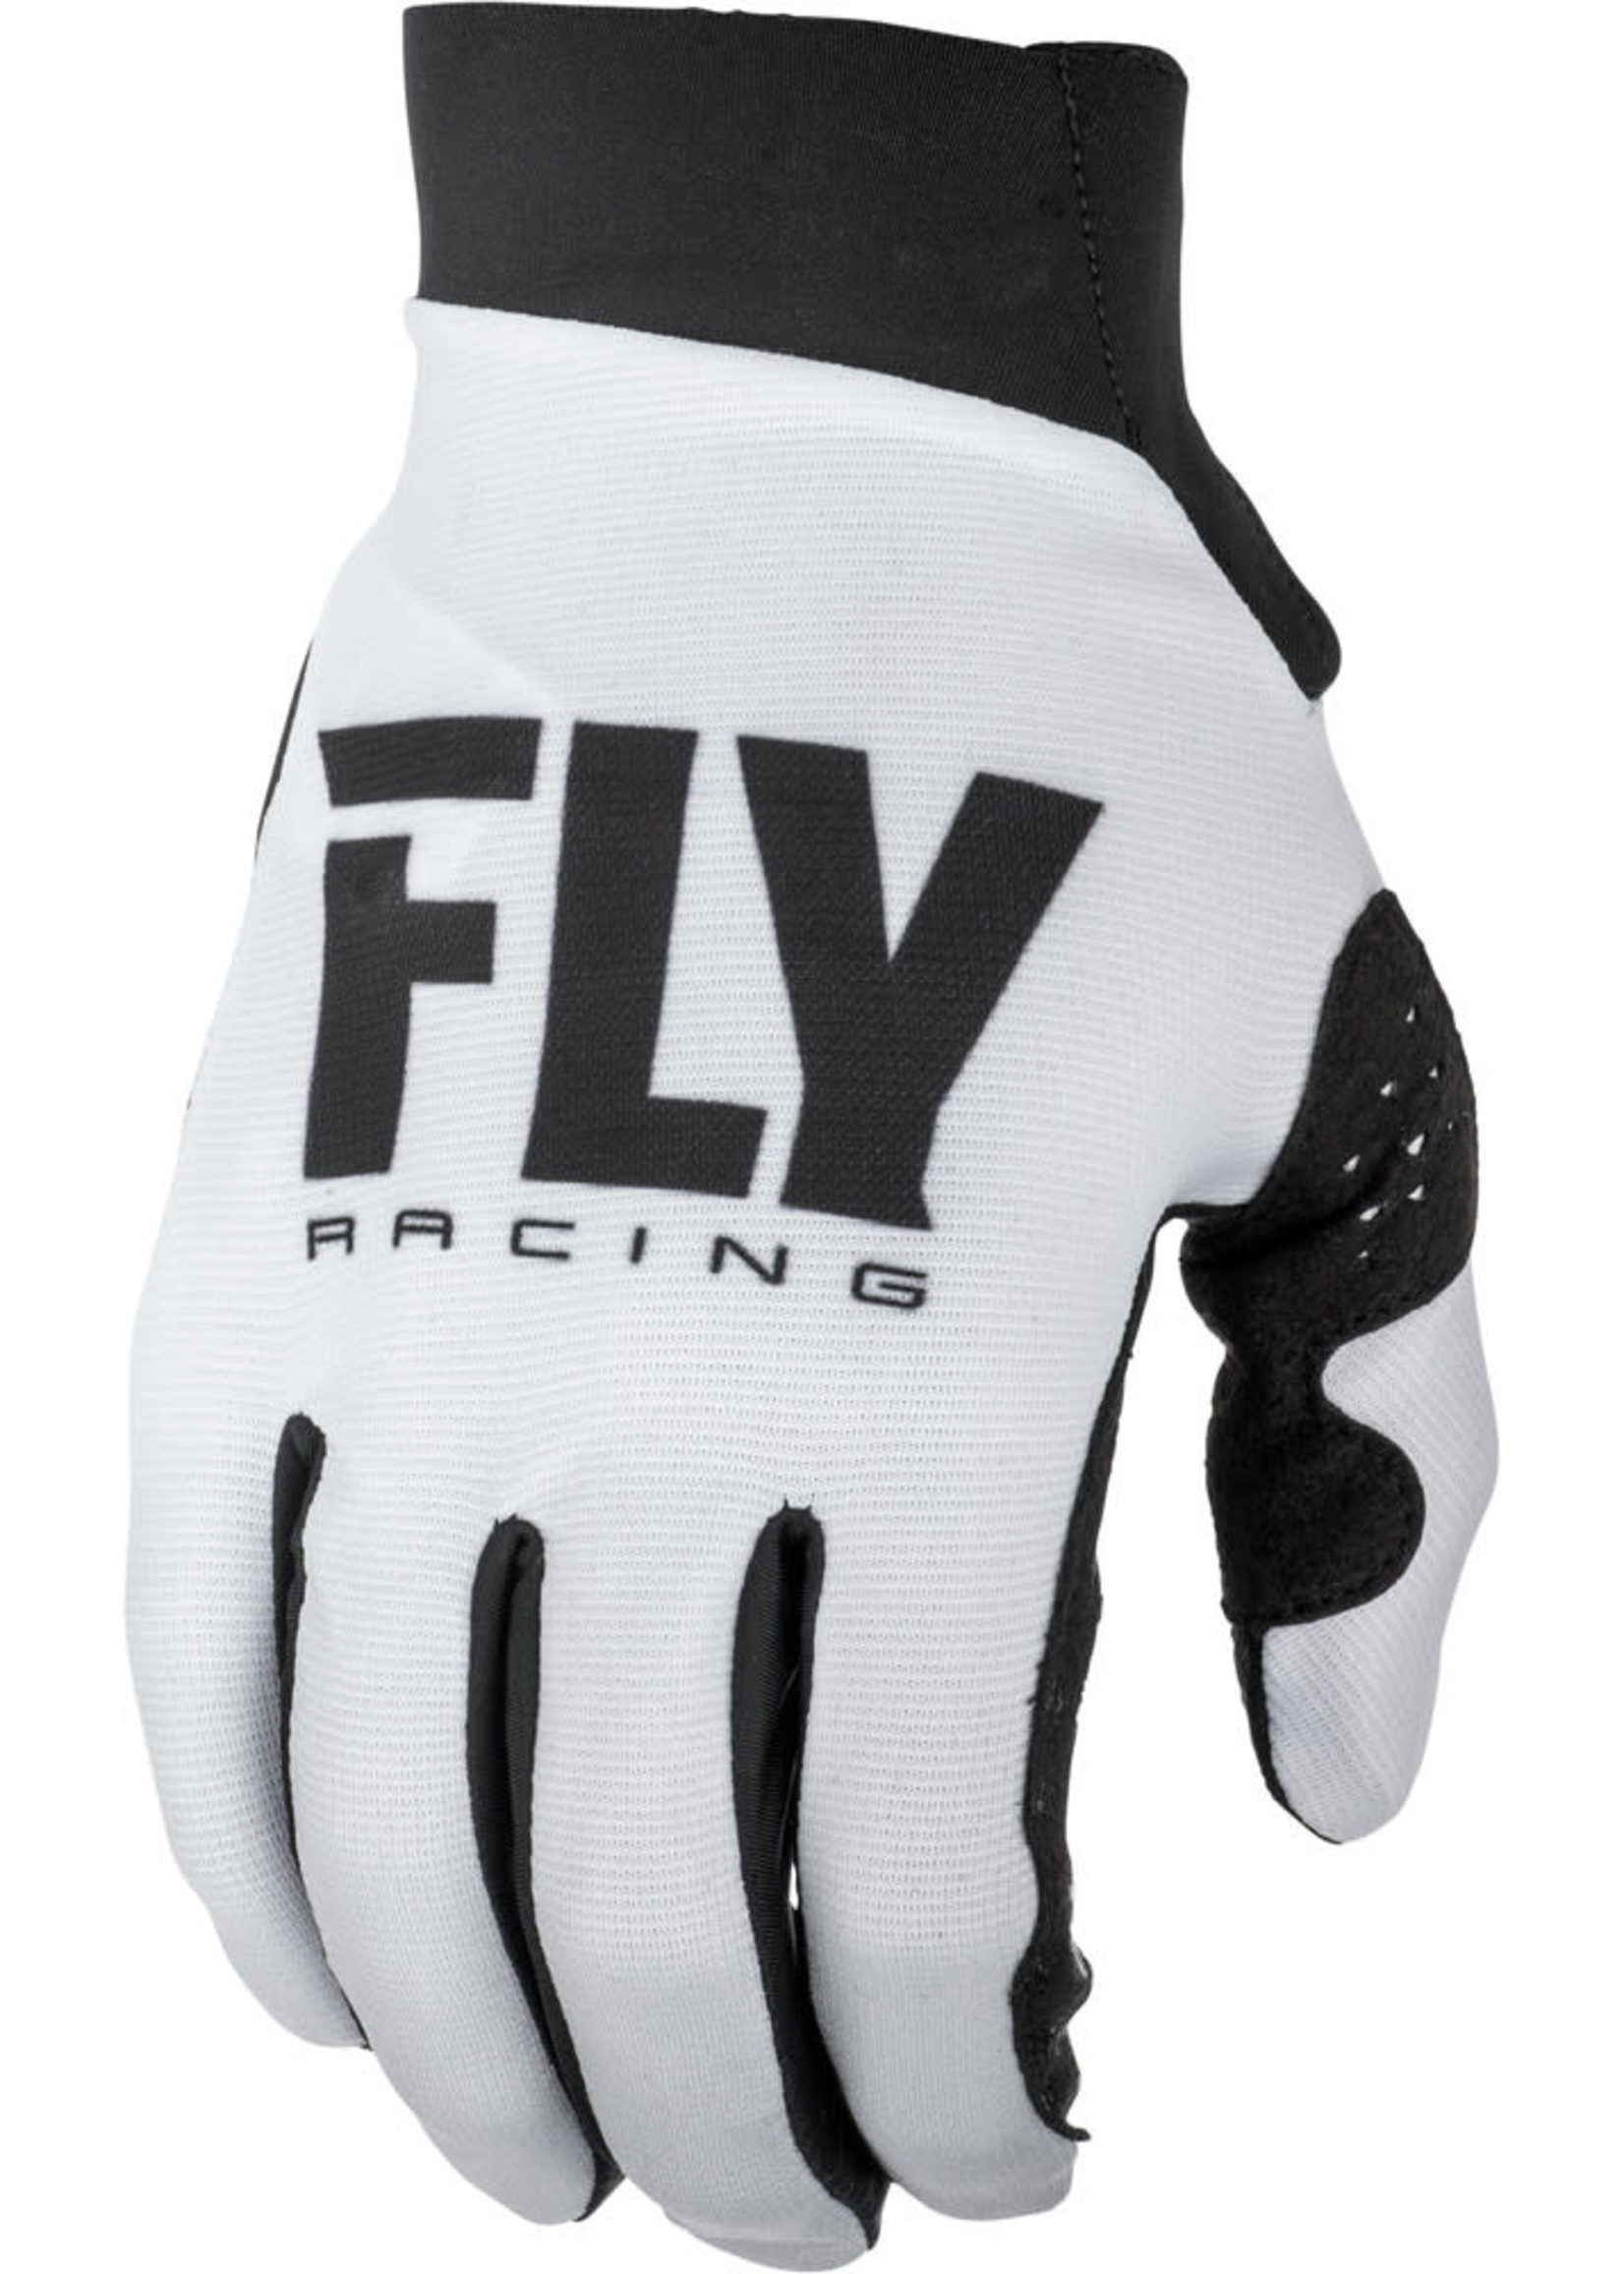 FLY RACING FLY RACING WMNS PRO LITE GLV WHT/BLK SZ 3 YOUTH